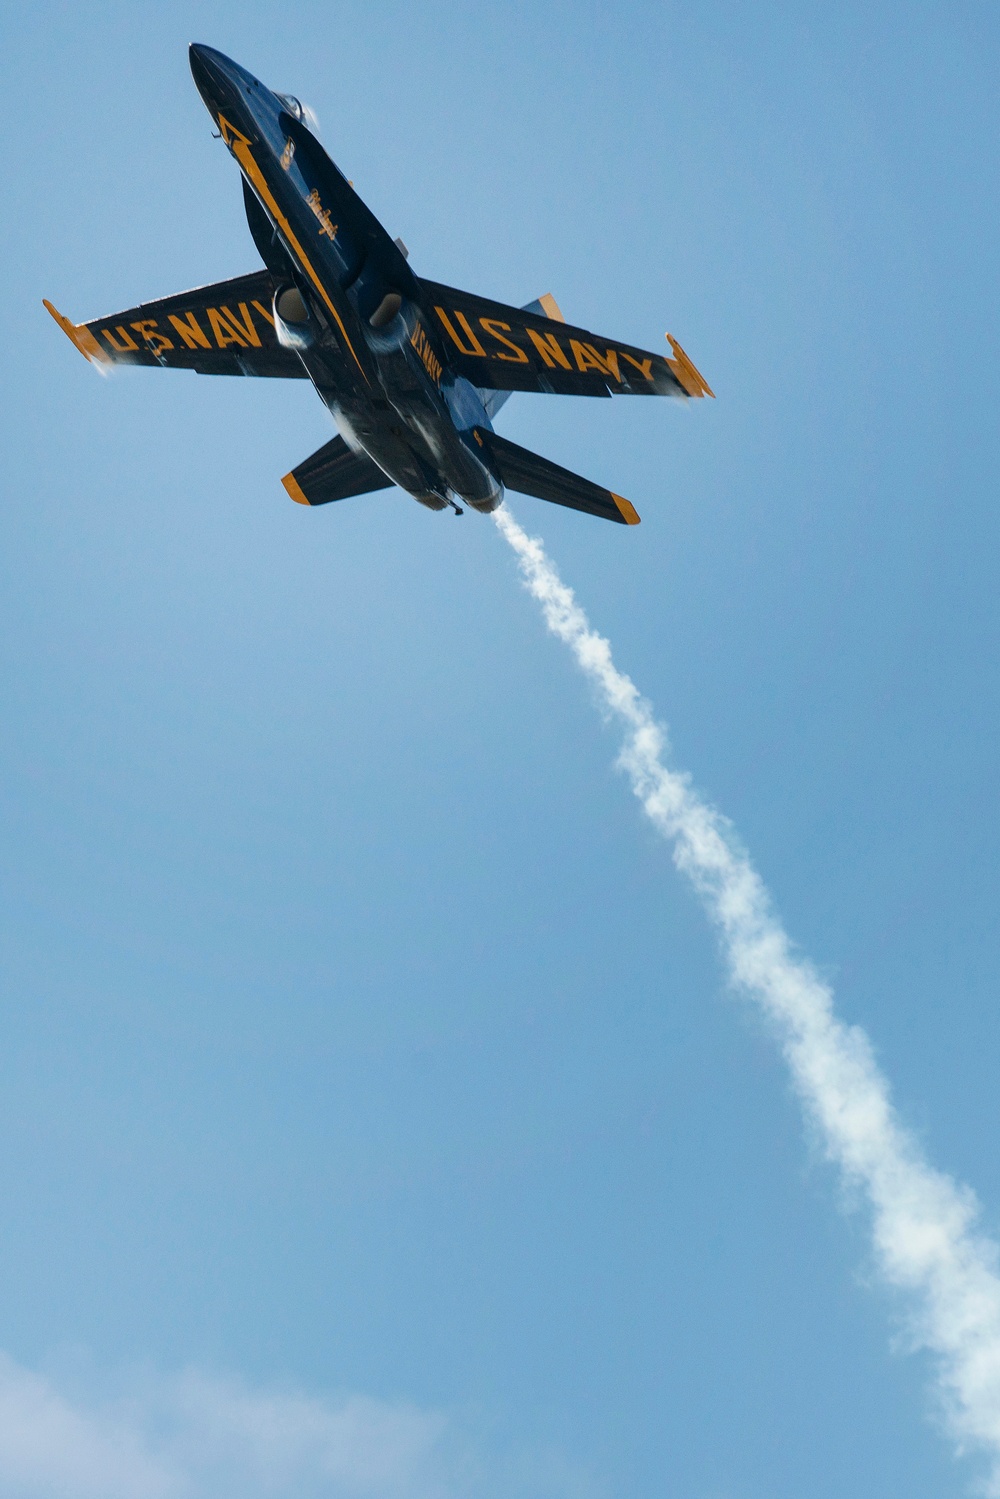 Blue Angels illustrate precision during Wings Over the Pacific